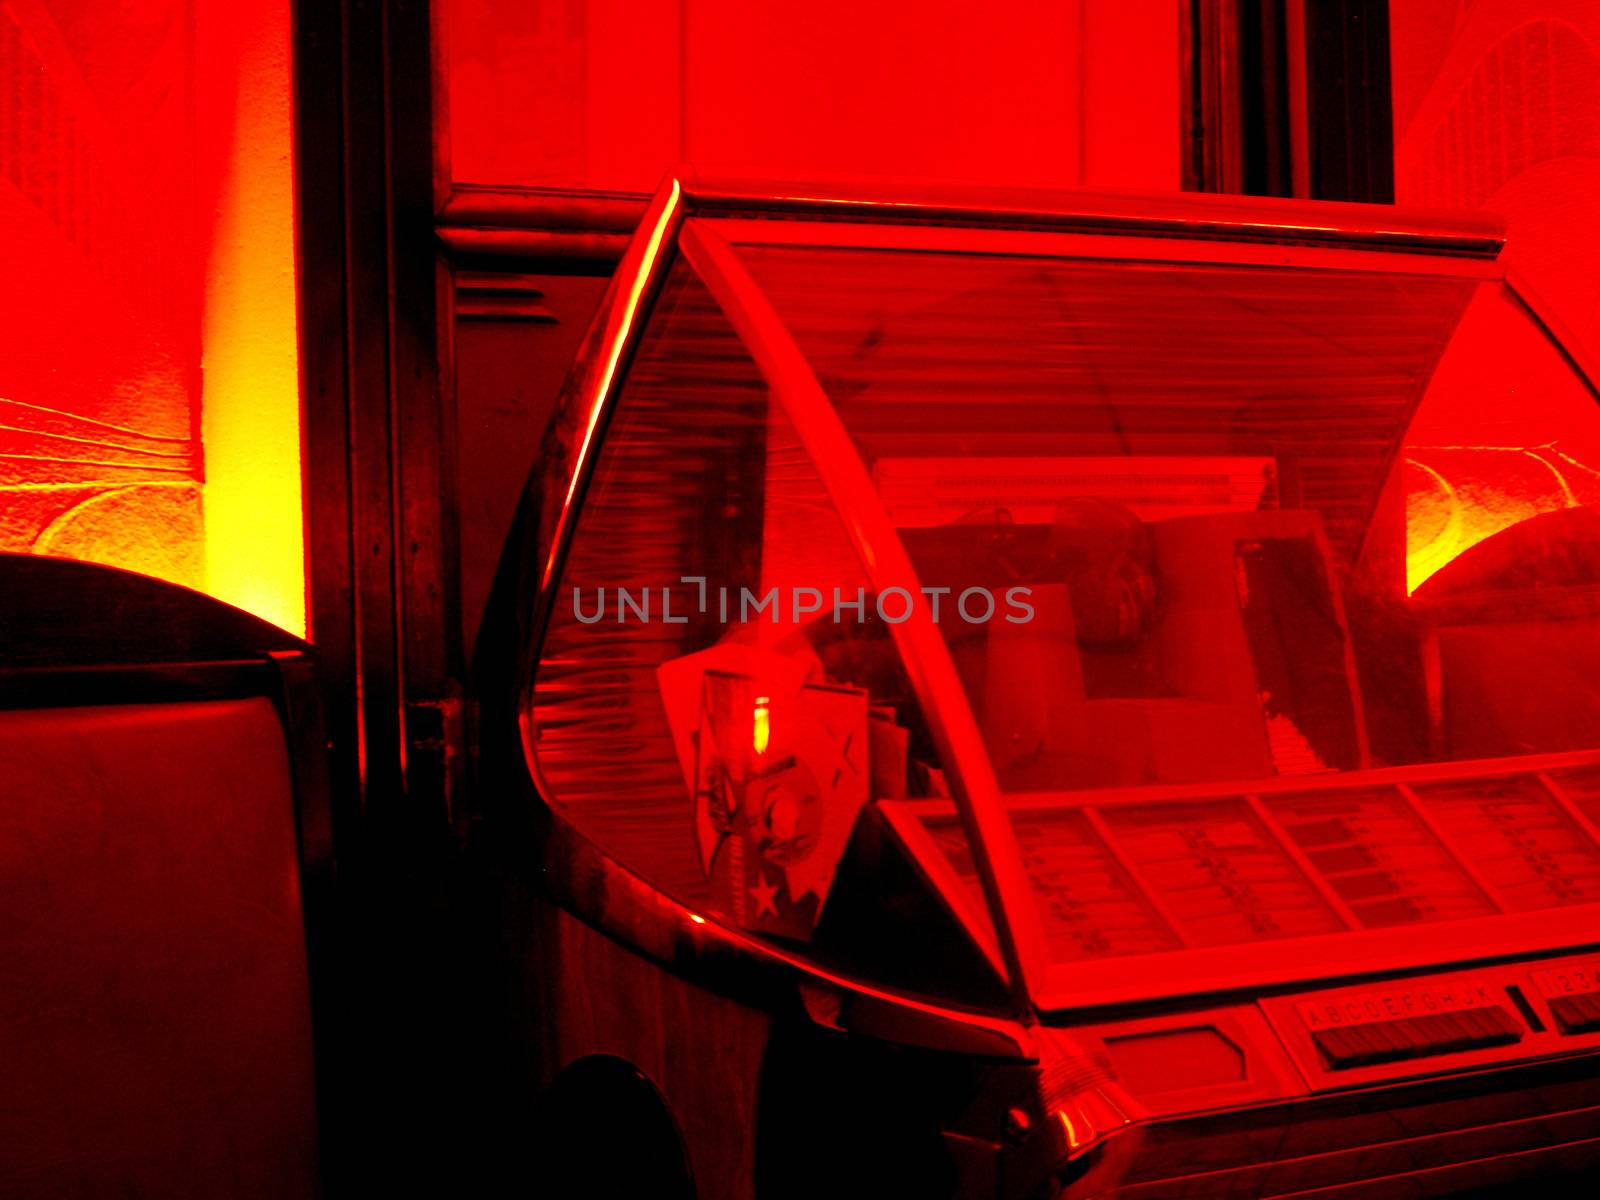 Juke box in a red lit room.  (Ambiant not created)